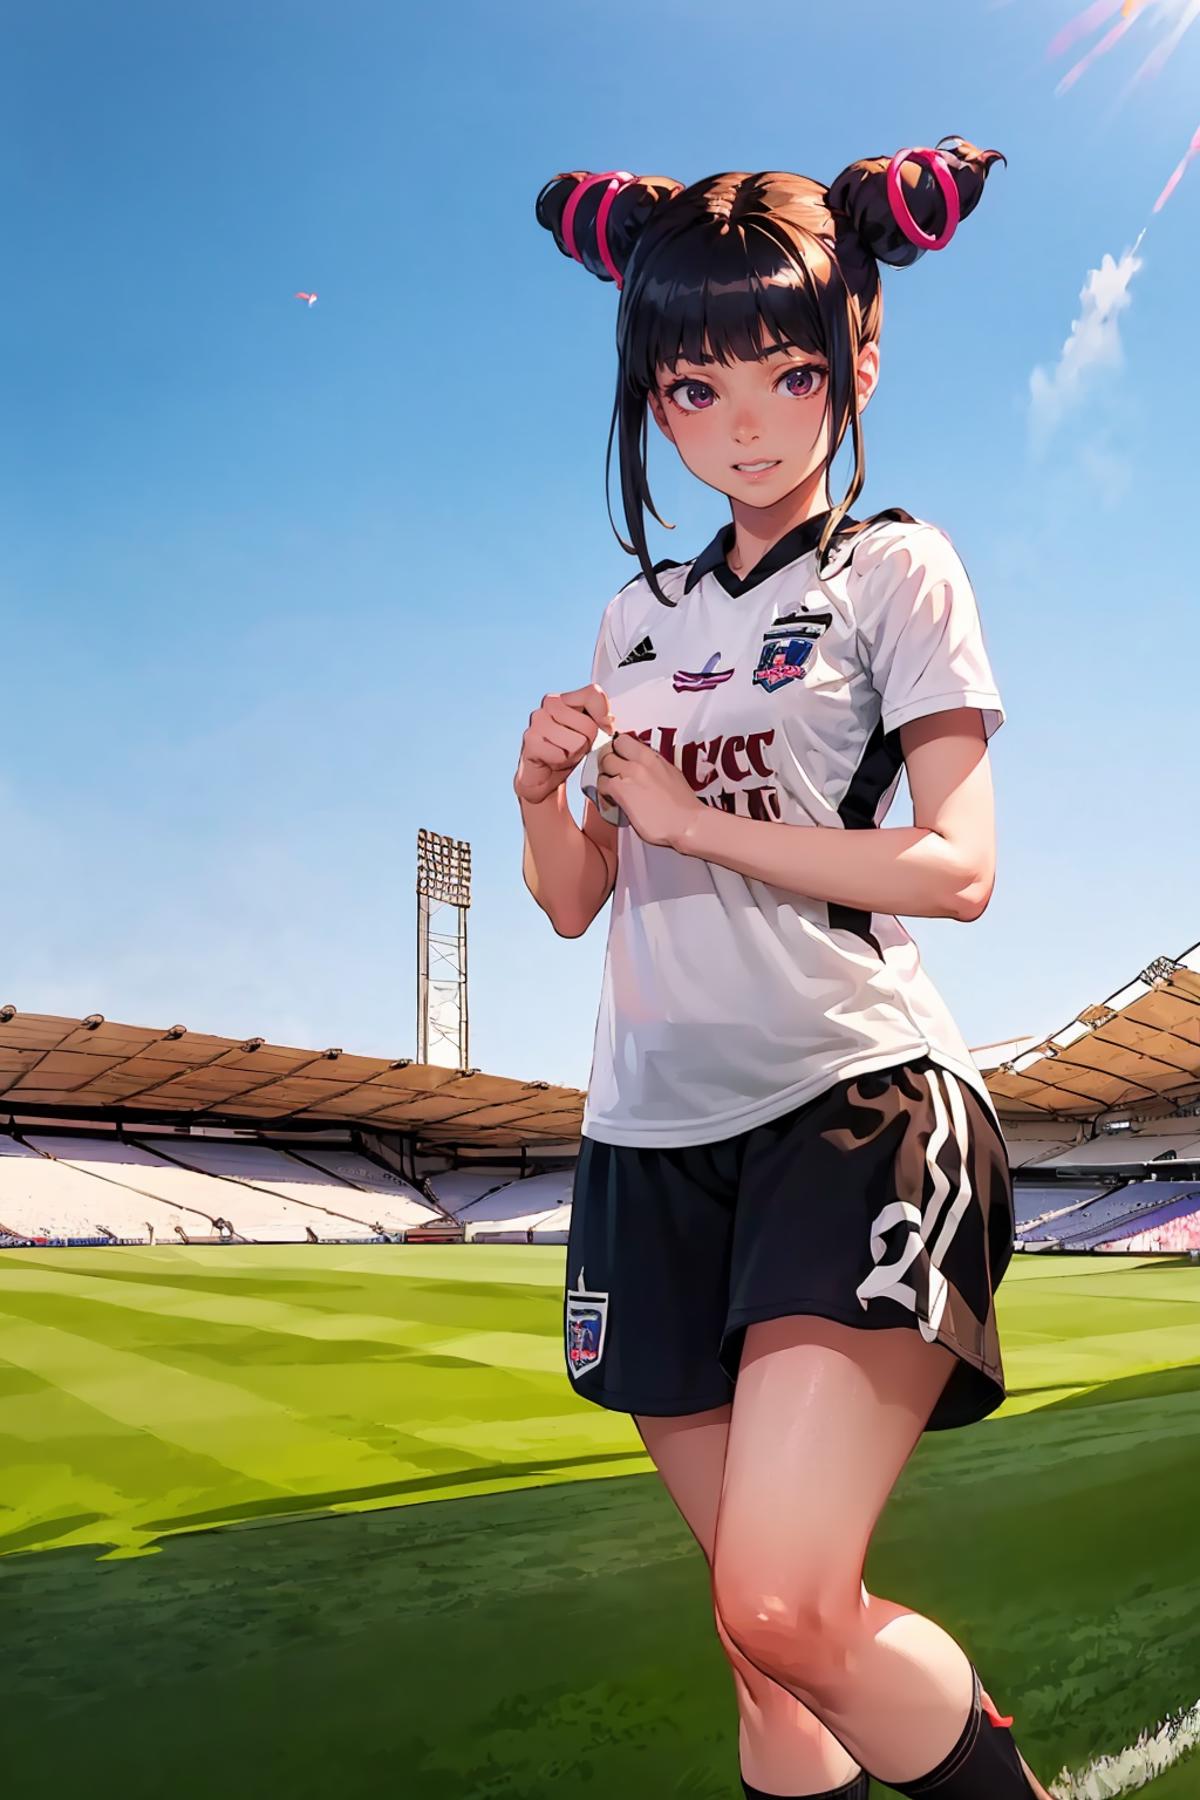 Soccer Uniforms - Clothing Gallery LYCORIS (20+ Football Uniforms) image by hattychan